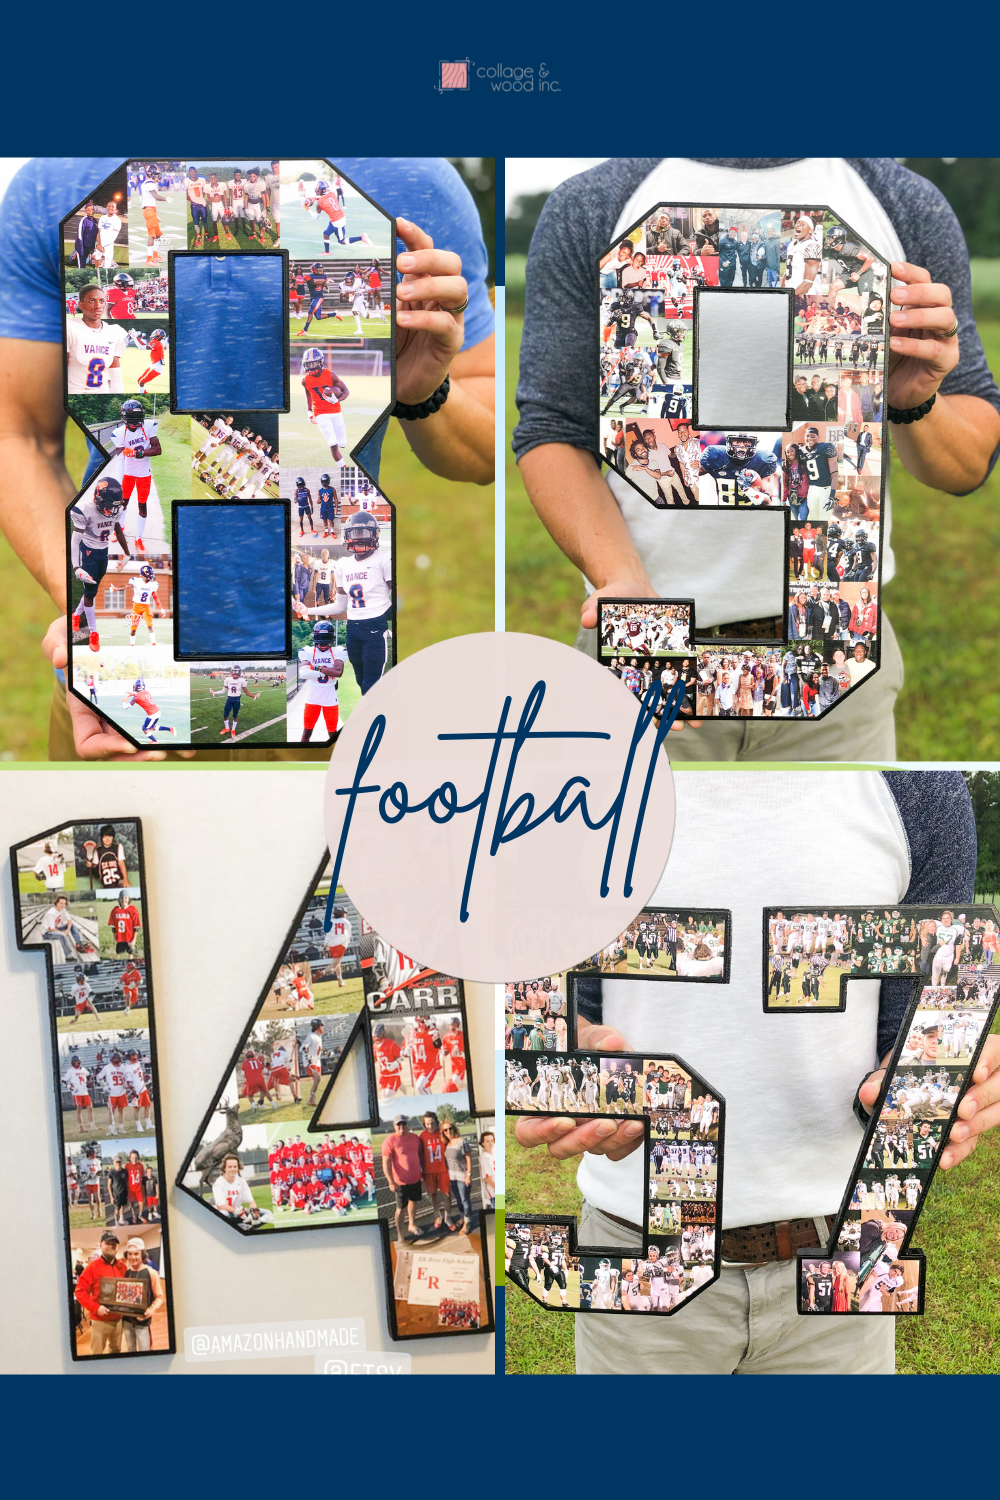 Regardless of a new policy, don't forget to celebrate your athlete on Senior Night! We've got you covered with custom collages for your sport!